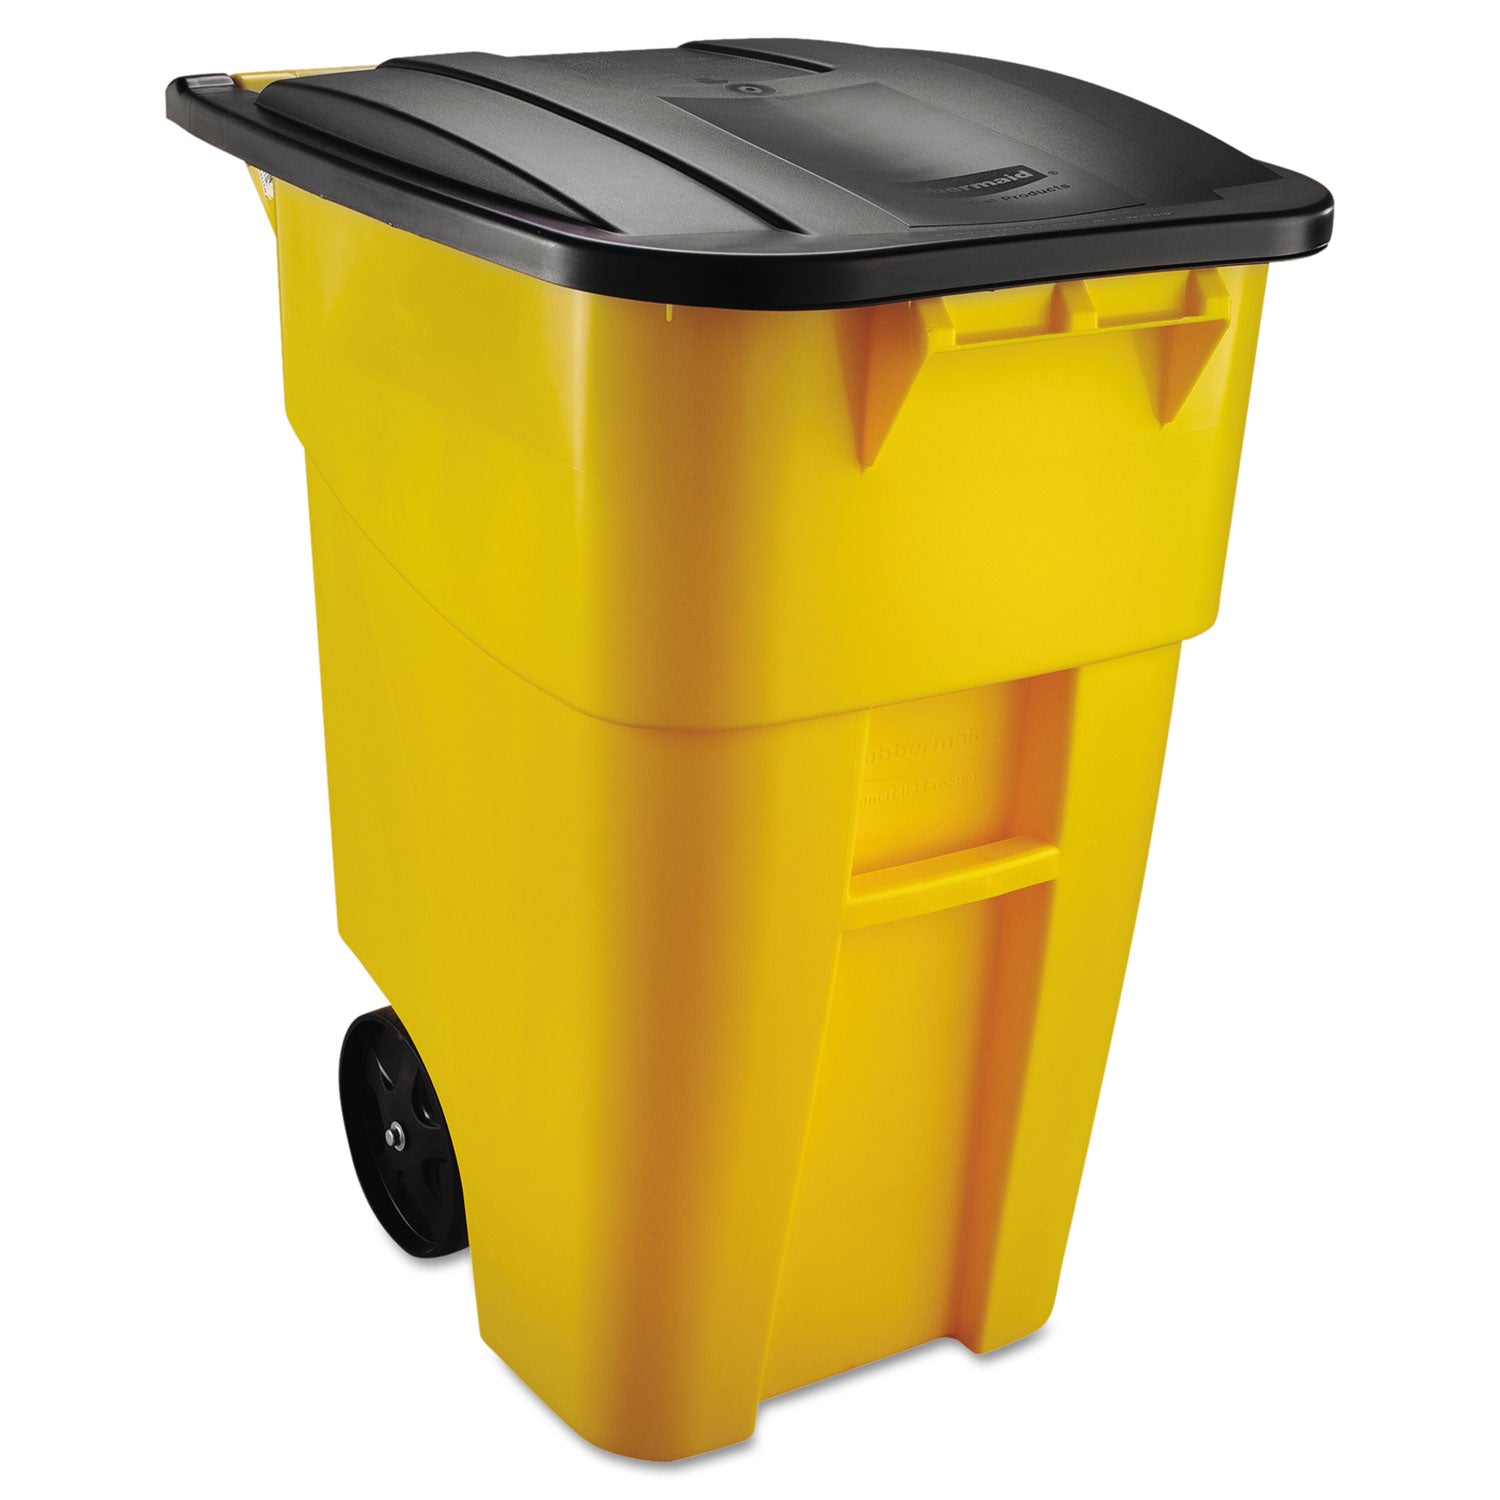 Square Brute Rollout Container, 50 gal, Molded Plastic, Yellow - 